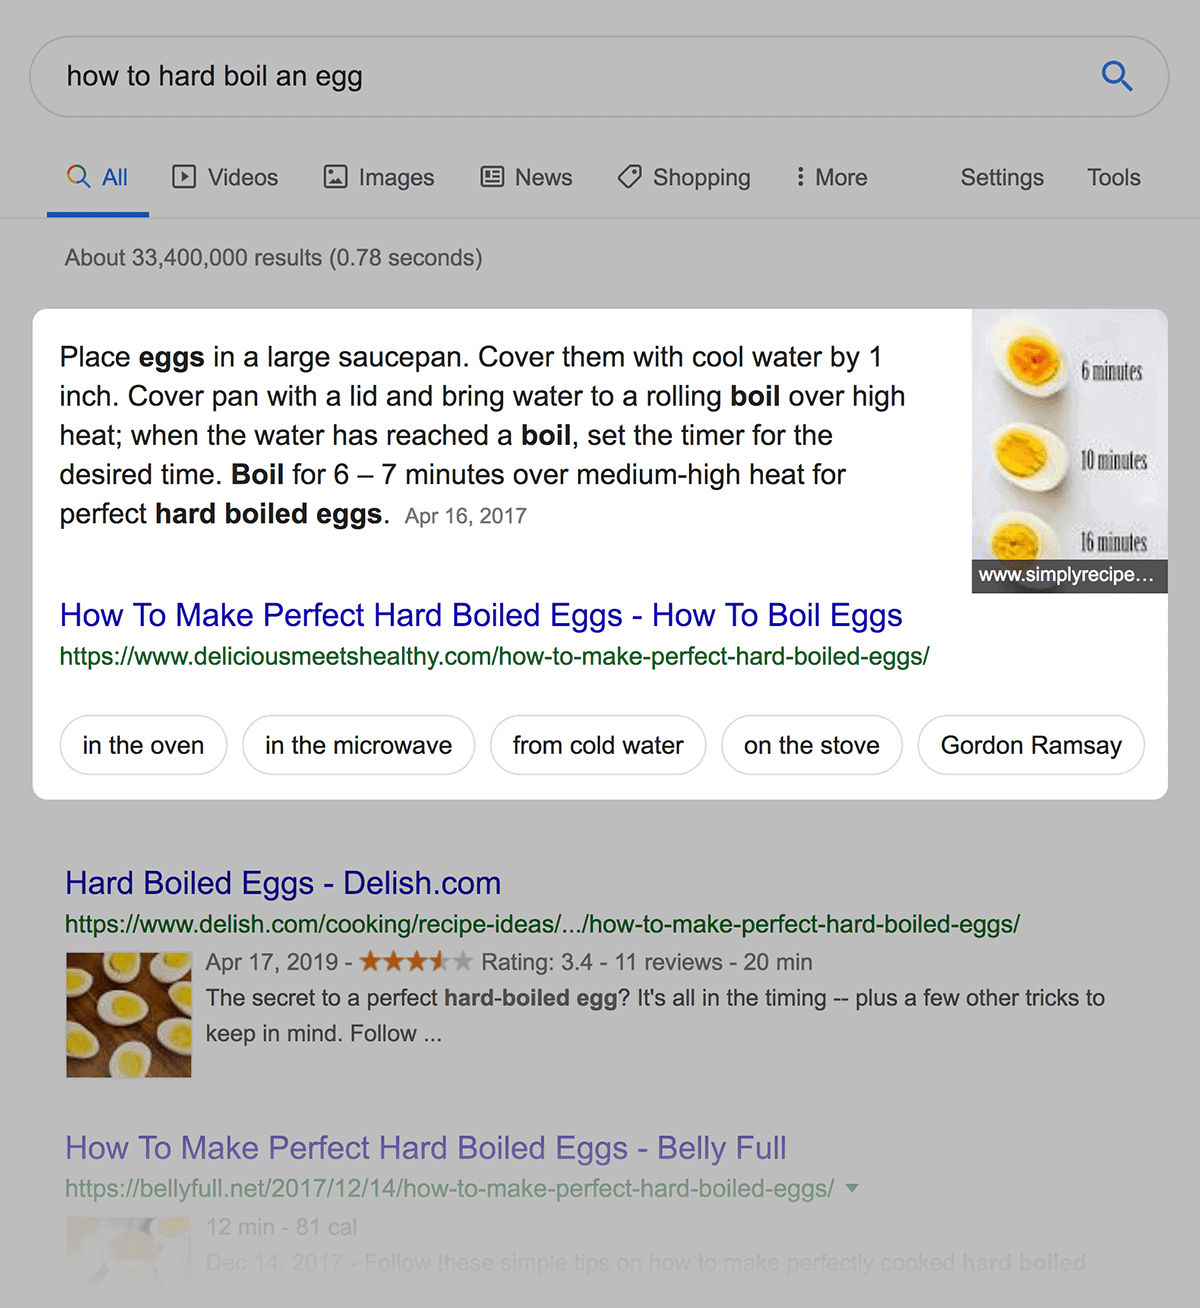 "how to hard boil an egg" Featured Snippet